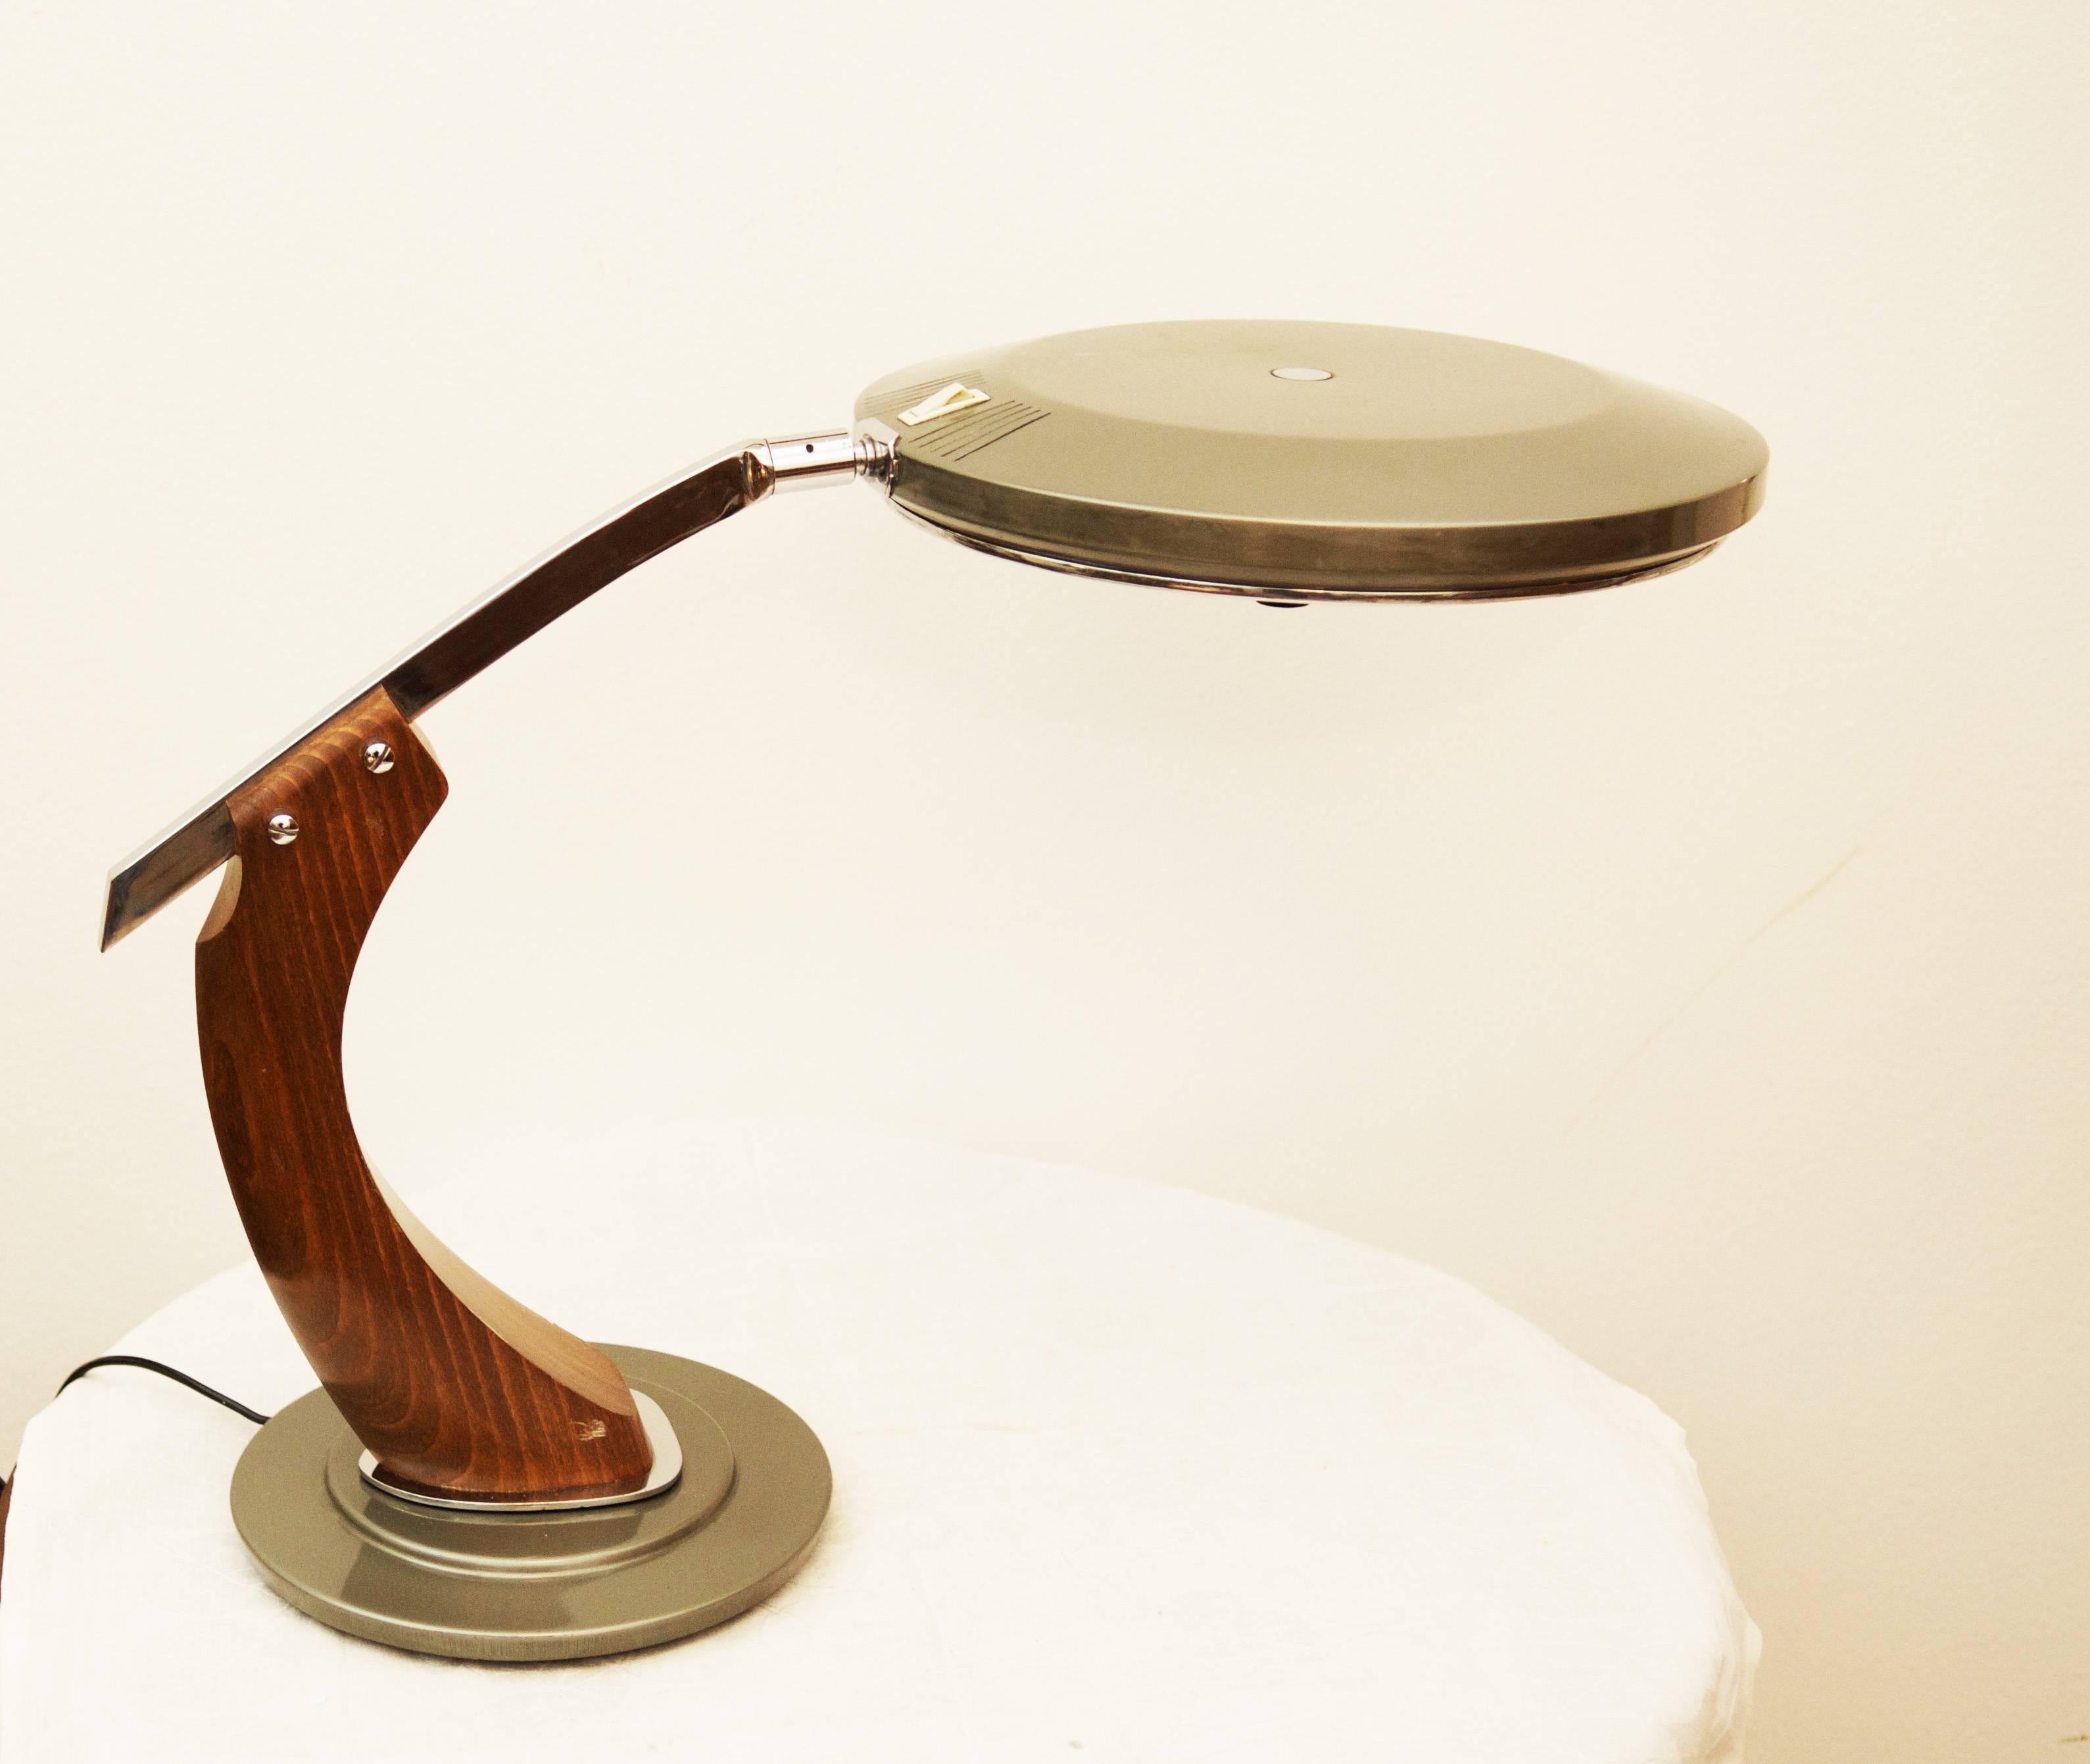 Rare Midcentury Spanish desk lamp with wooden swivel arm and a switch at the base of the lamp head, Madrid from the early 1960s.
Labelled on the base Fase.